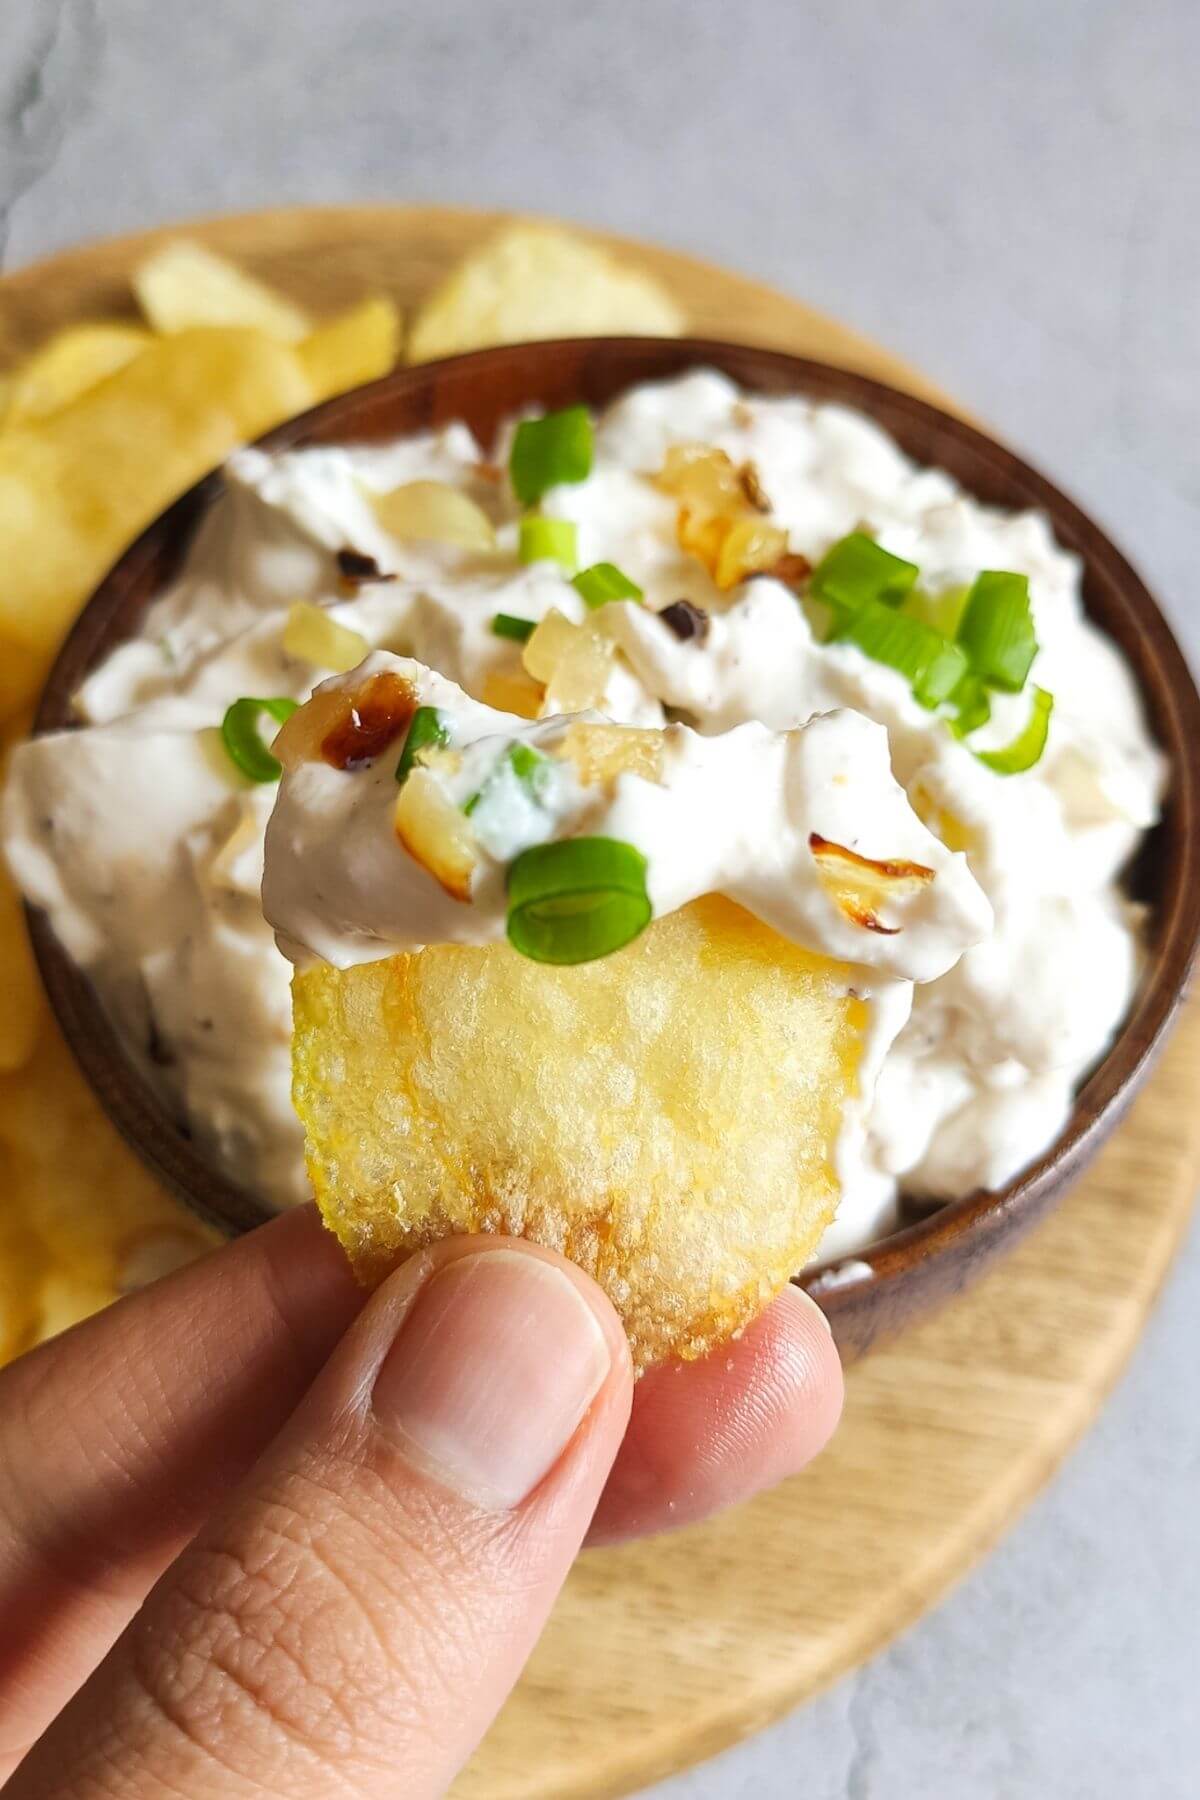 A potato chip dipped in French onion dip lifted over a bowl of dip